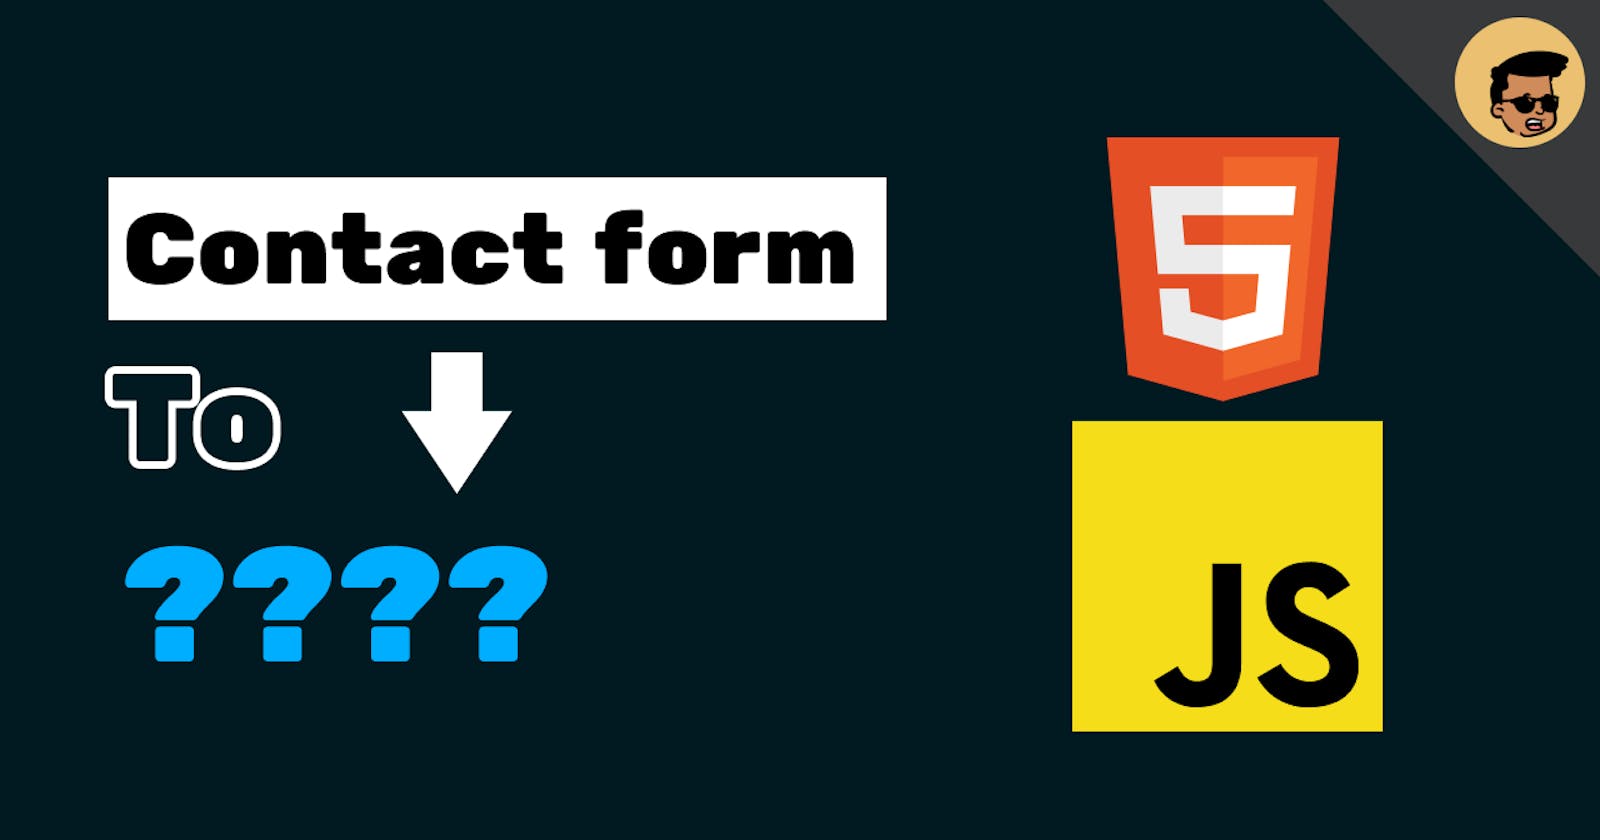 The Easiest way to receive data from the Contact form without a Backend